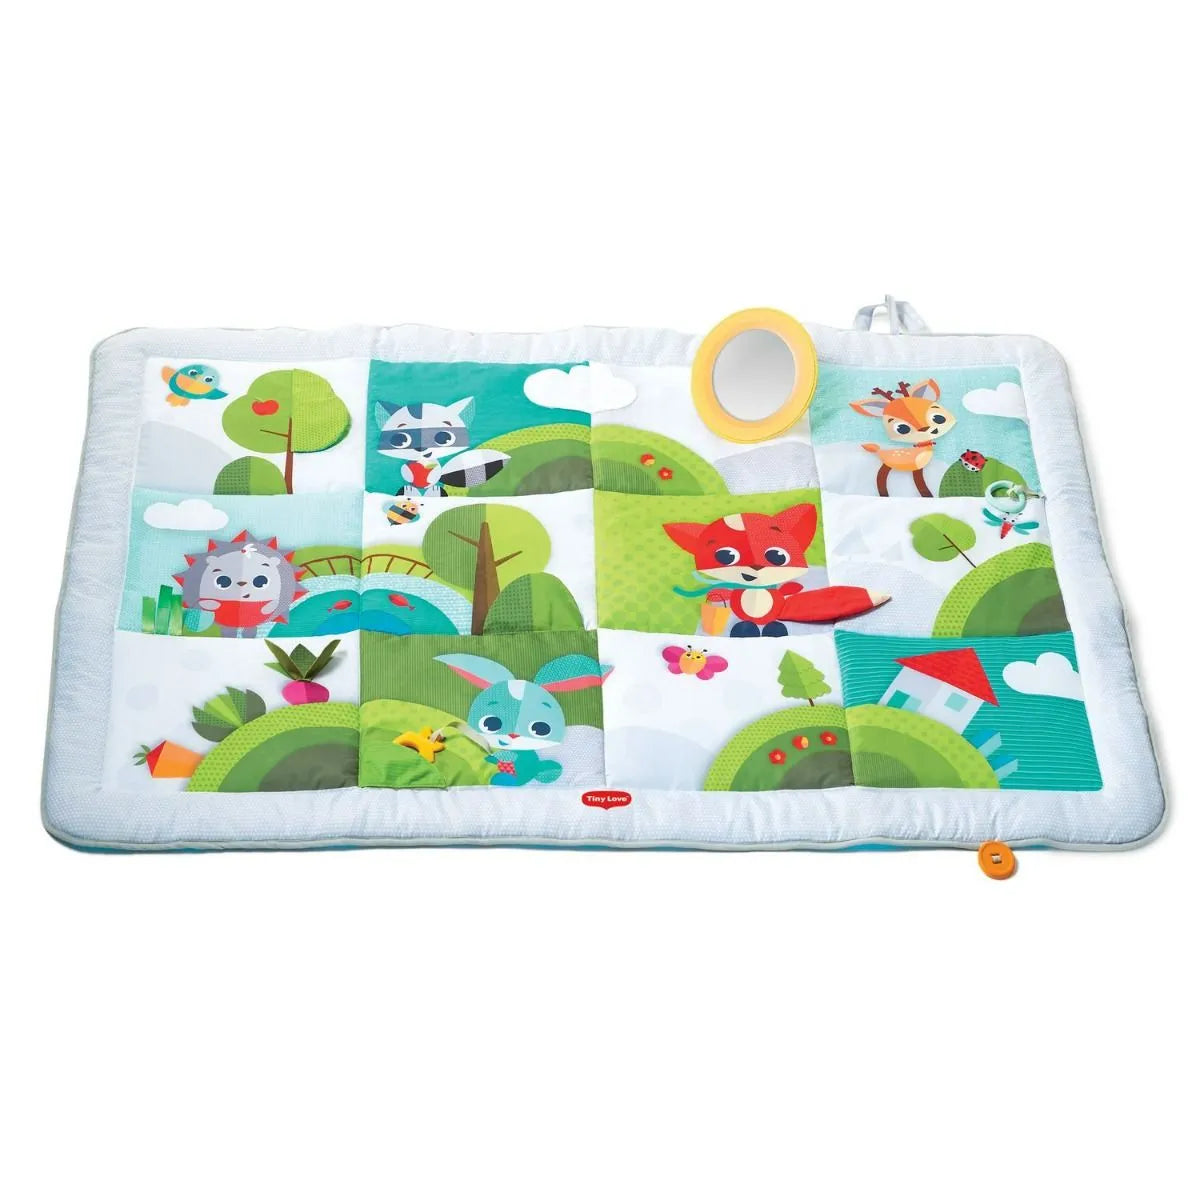 WinFun Snuggle Pals Super Playmat - BumbleToys - 0-24 Months, 2-4 Years, Babies, Baby Saftey & Health, Cecil, Pre-Order, Trampolines & Playgyms, Unisex